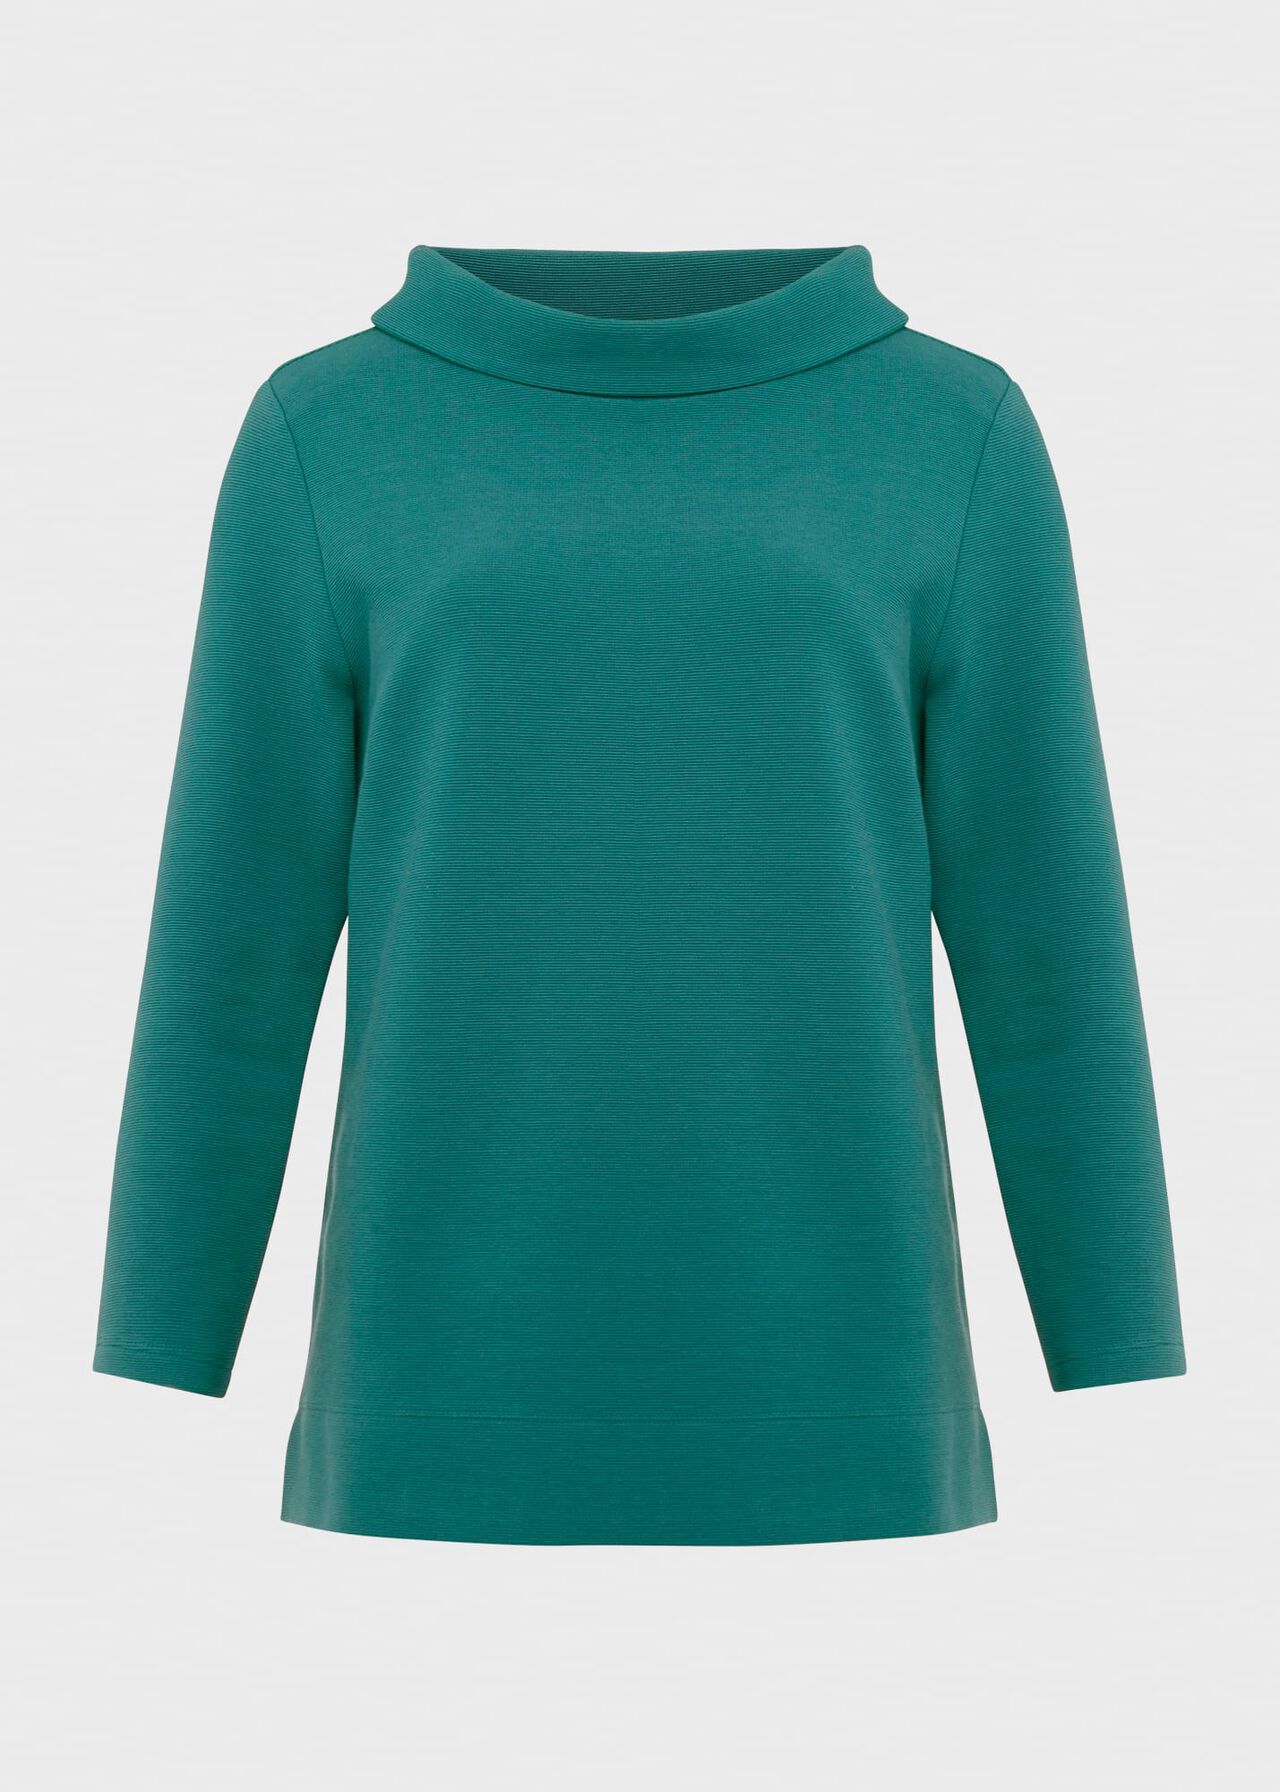 Betsy Textured Top With Cotton , Ocean Green, hi-res